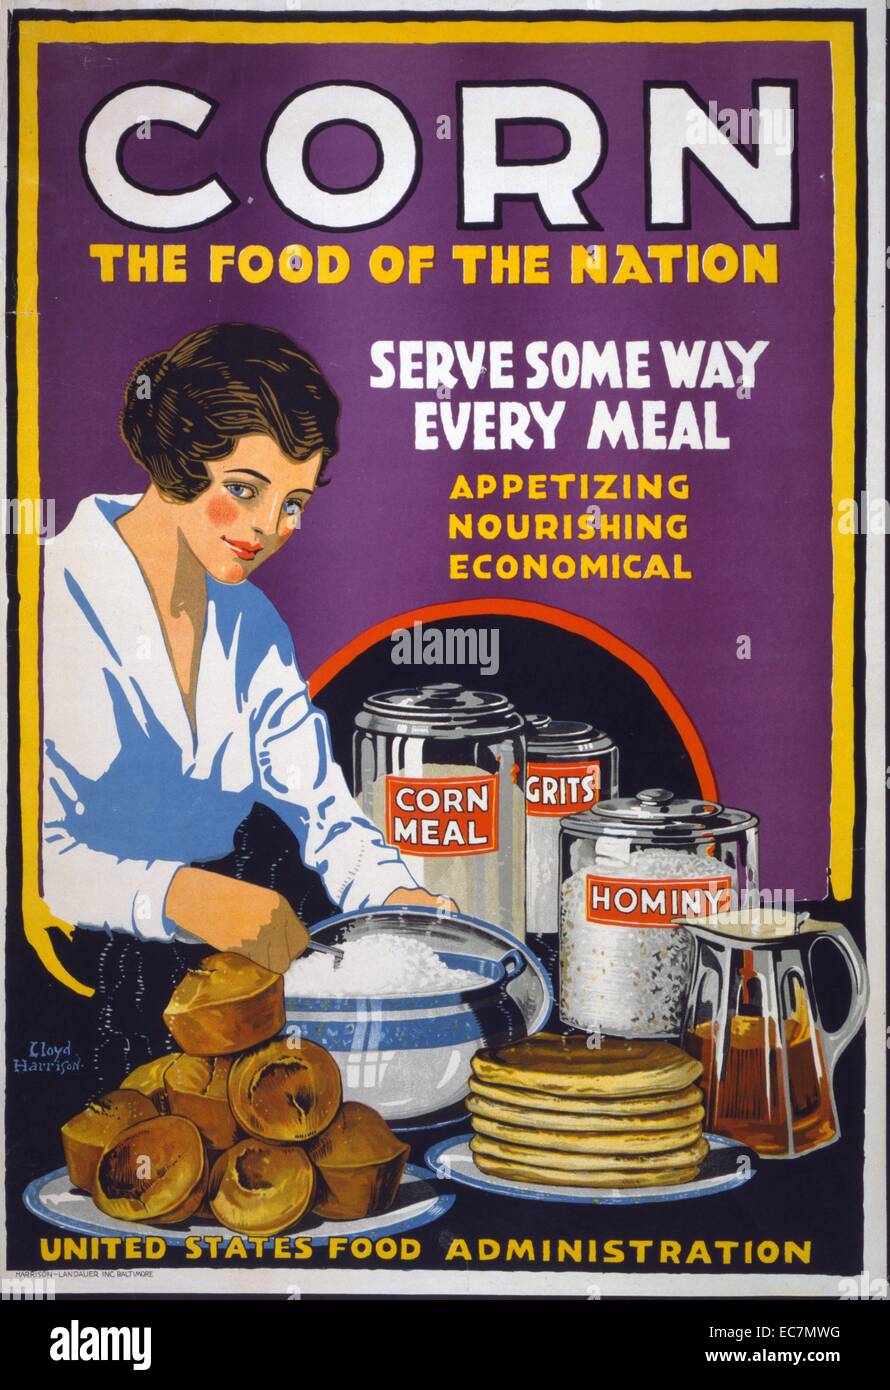 Advertising poster encouraging Americans to eat more corn - the food of the nation, Serve some way every meal - appetizing, nourishing, economical. Poster showing a woman serving muffins, pancakes, and grits, with canisters on the table labelled corn meal, grits, and hominy. Stock Photo